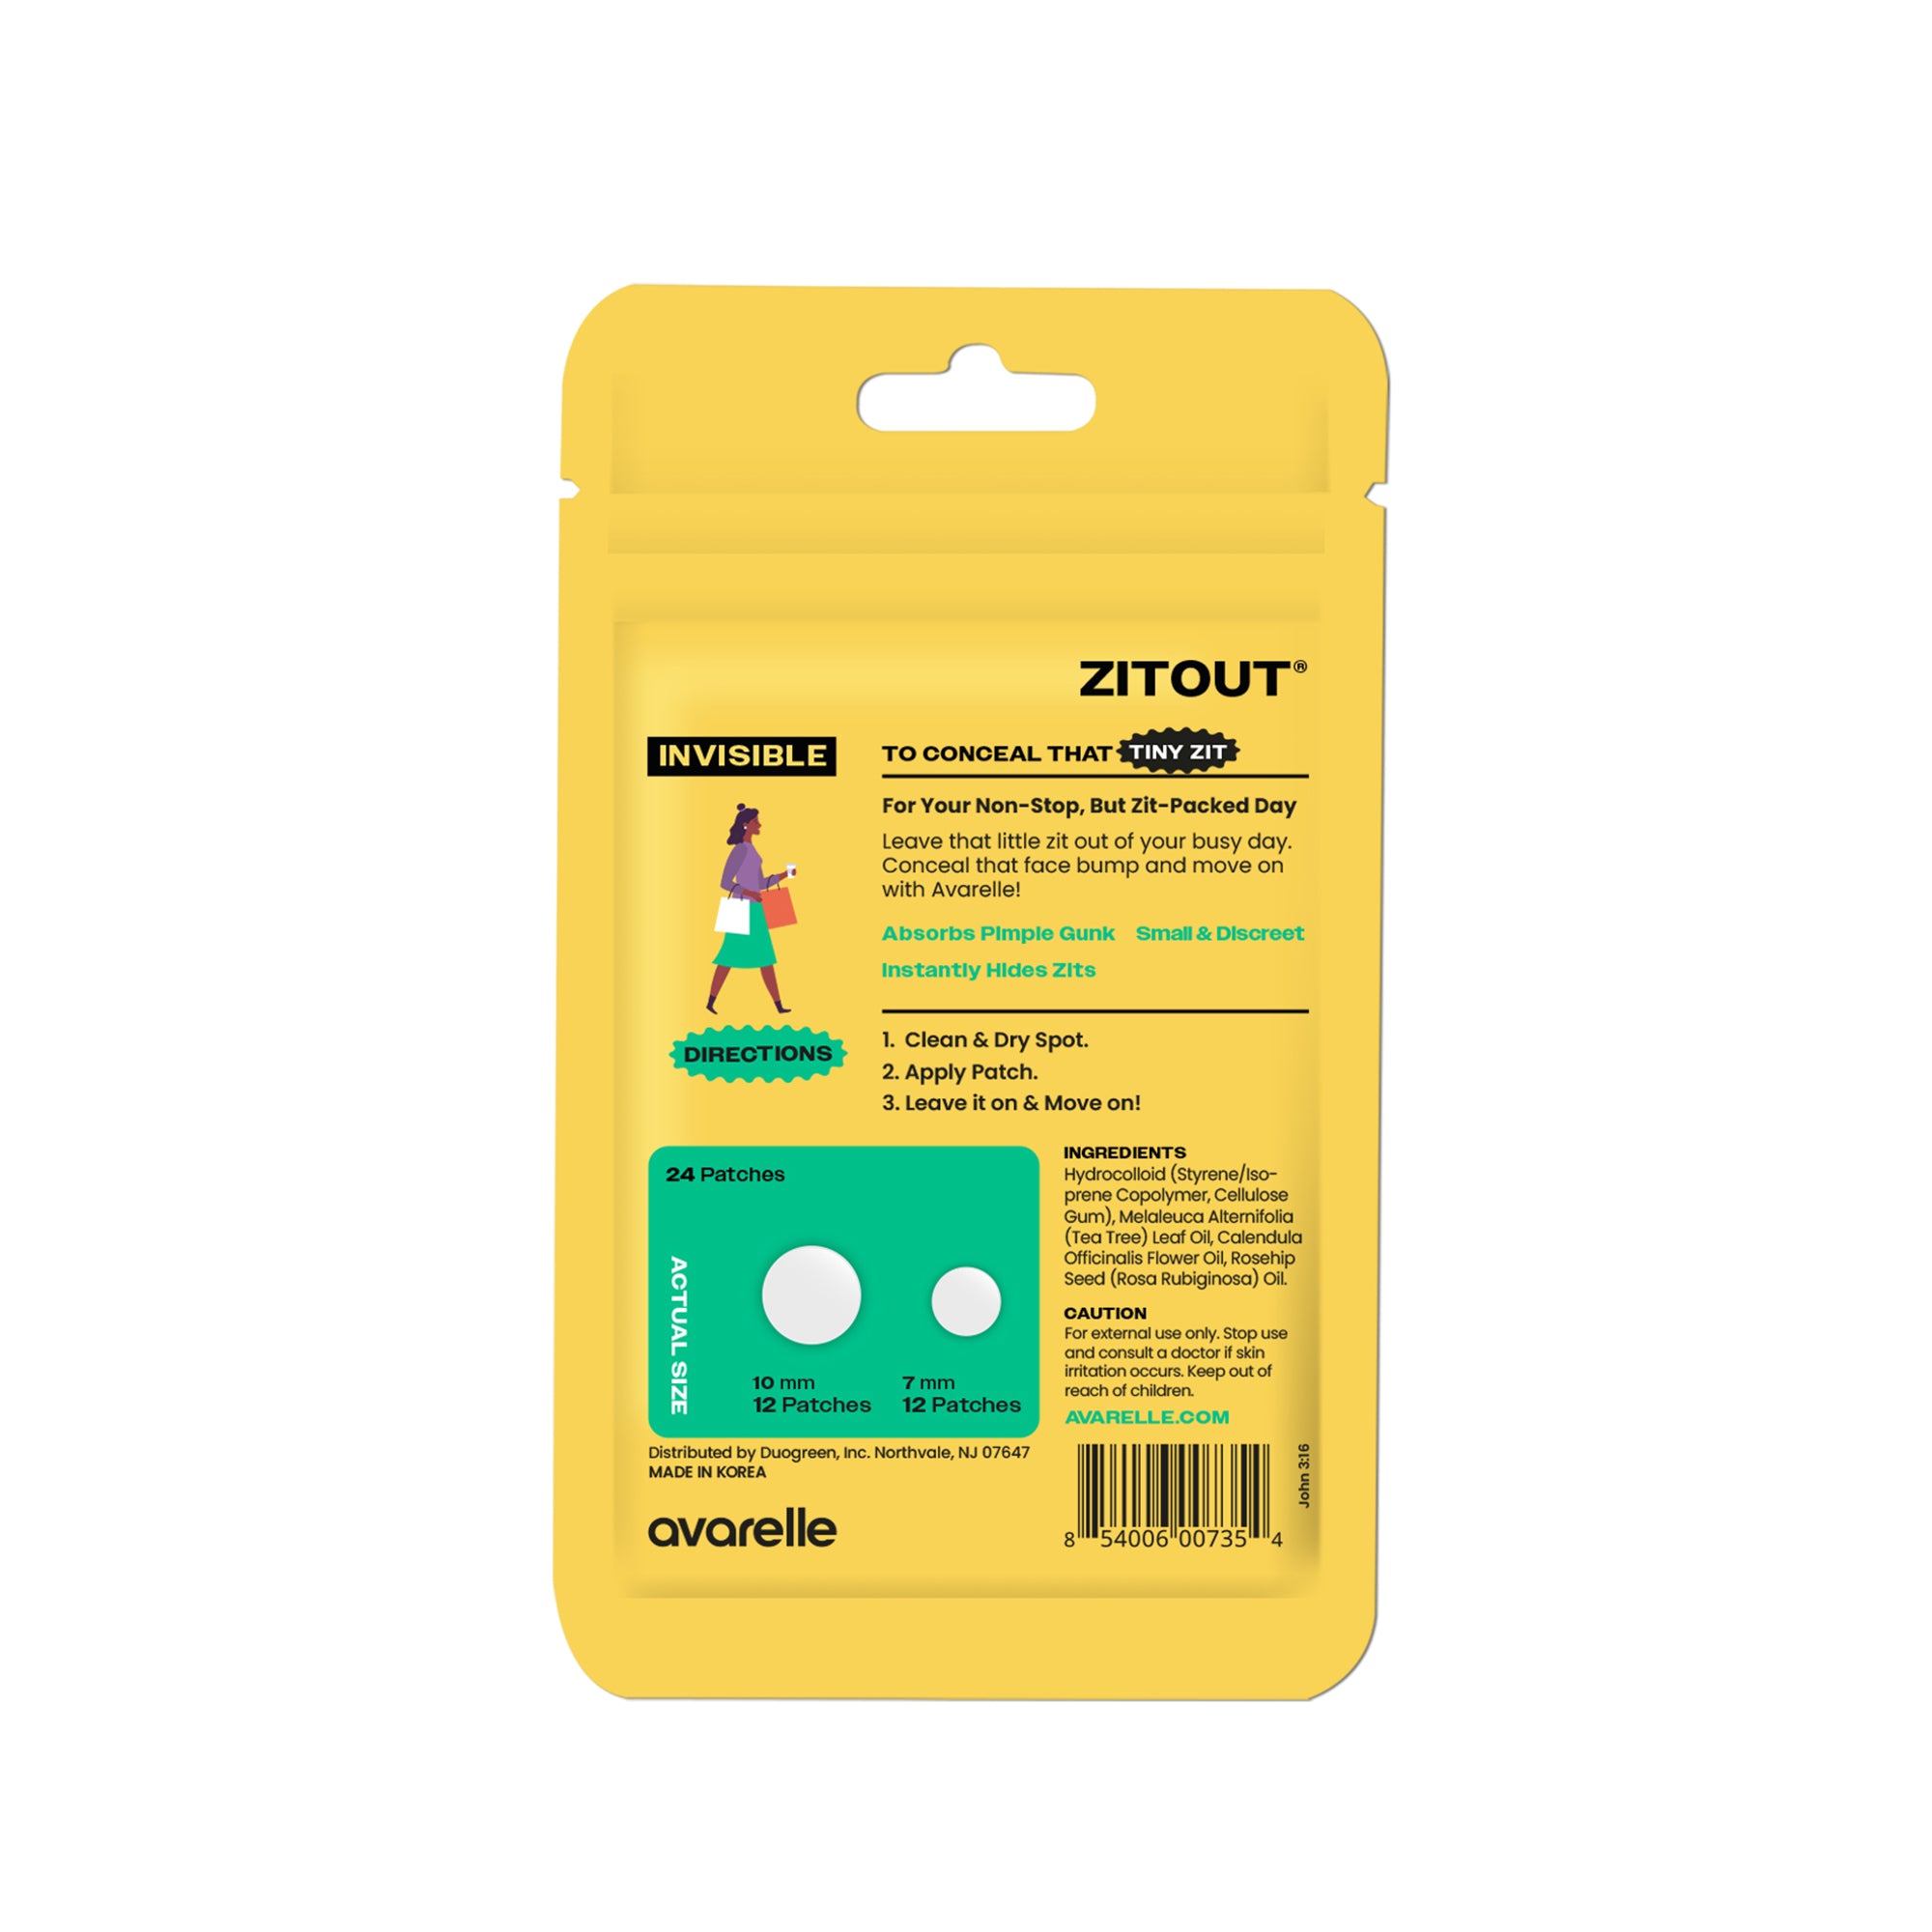 Packaging for Avarelle ZITOUT Invisible (AM) Acne Patch with product information and usage instructions including all ingredients such as Calendula, tea tree, and cica oil.